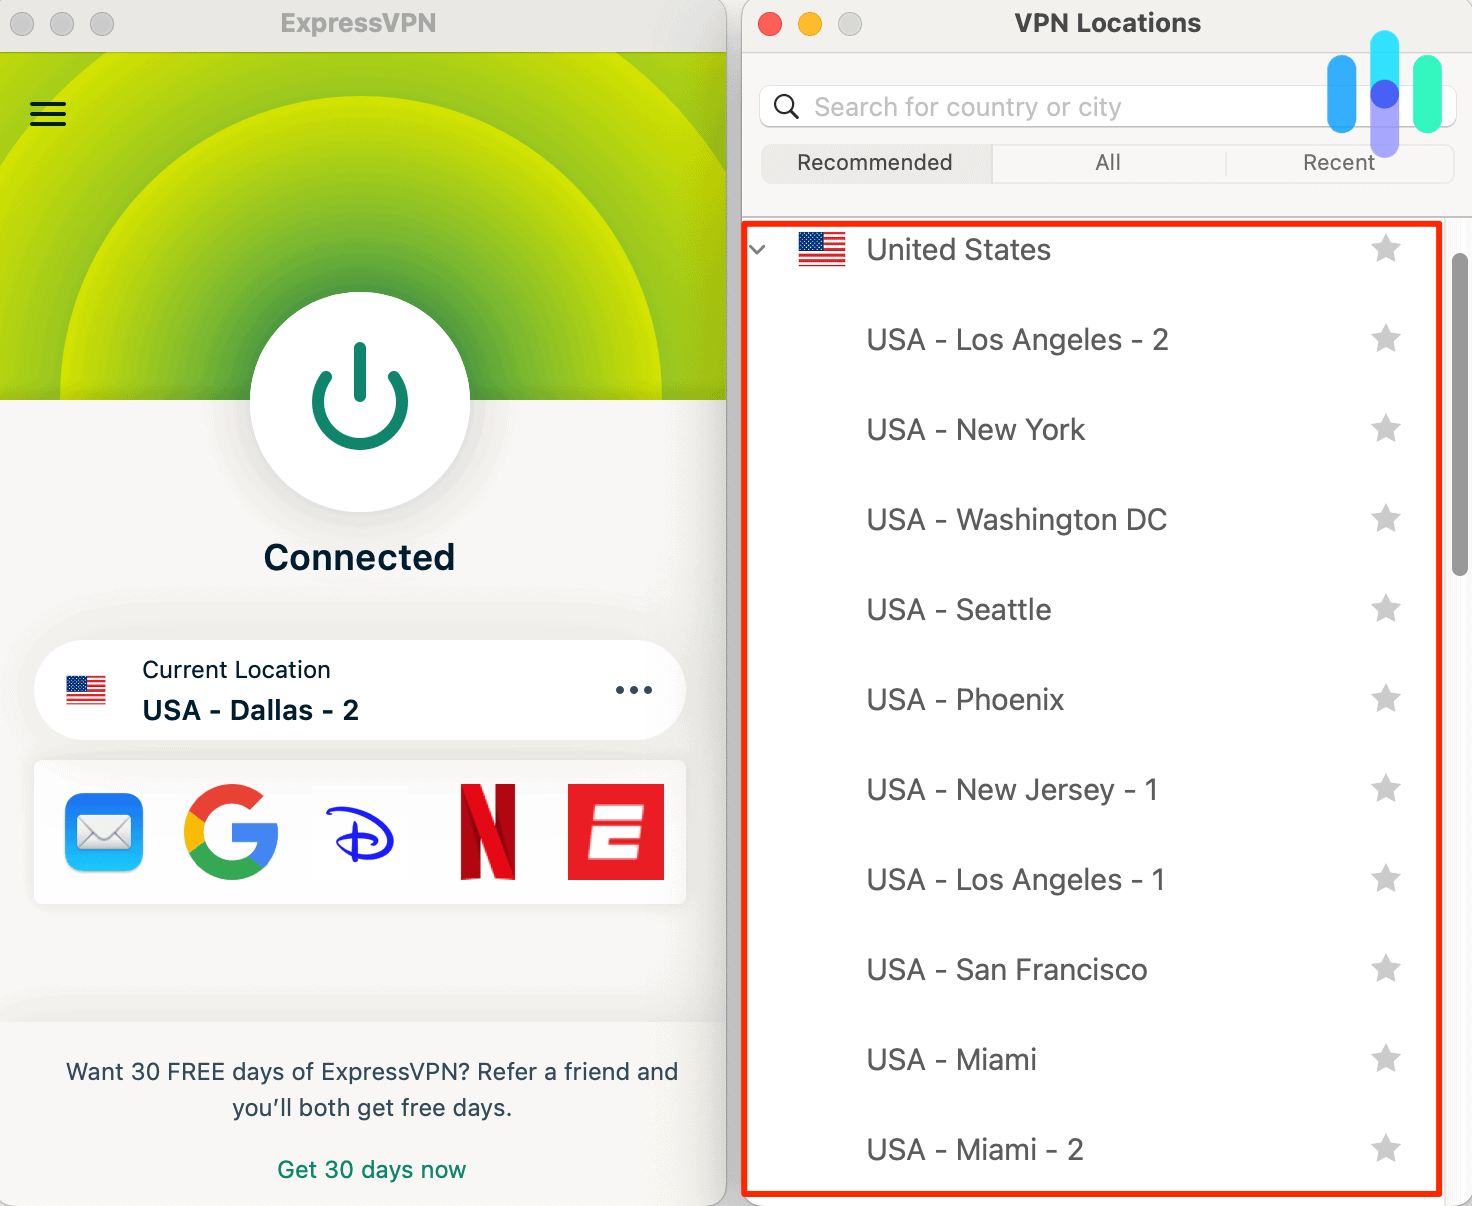 ExpressVPN has different 18 US cities to connect to